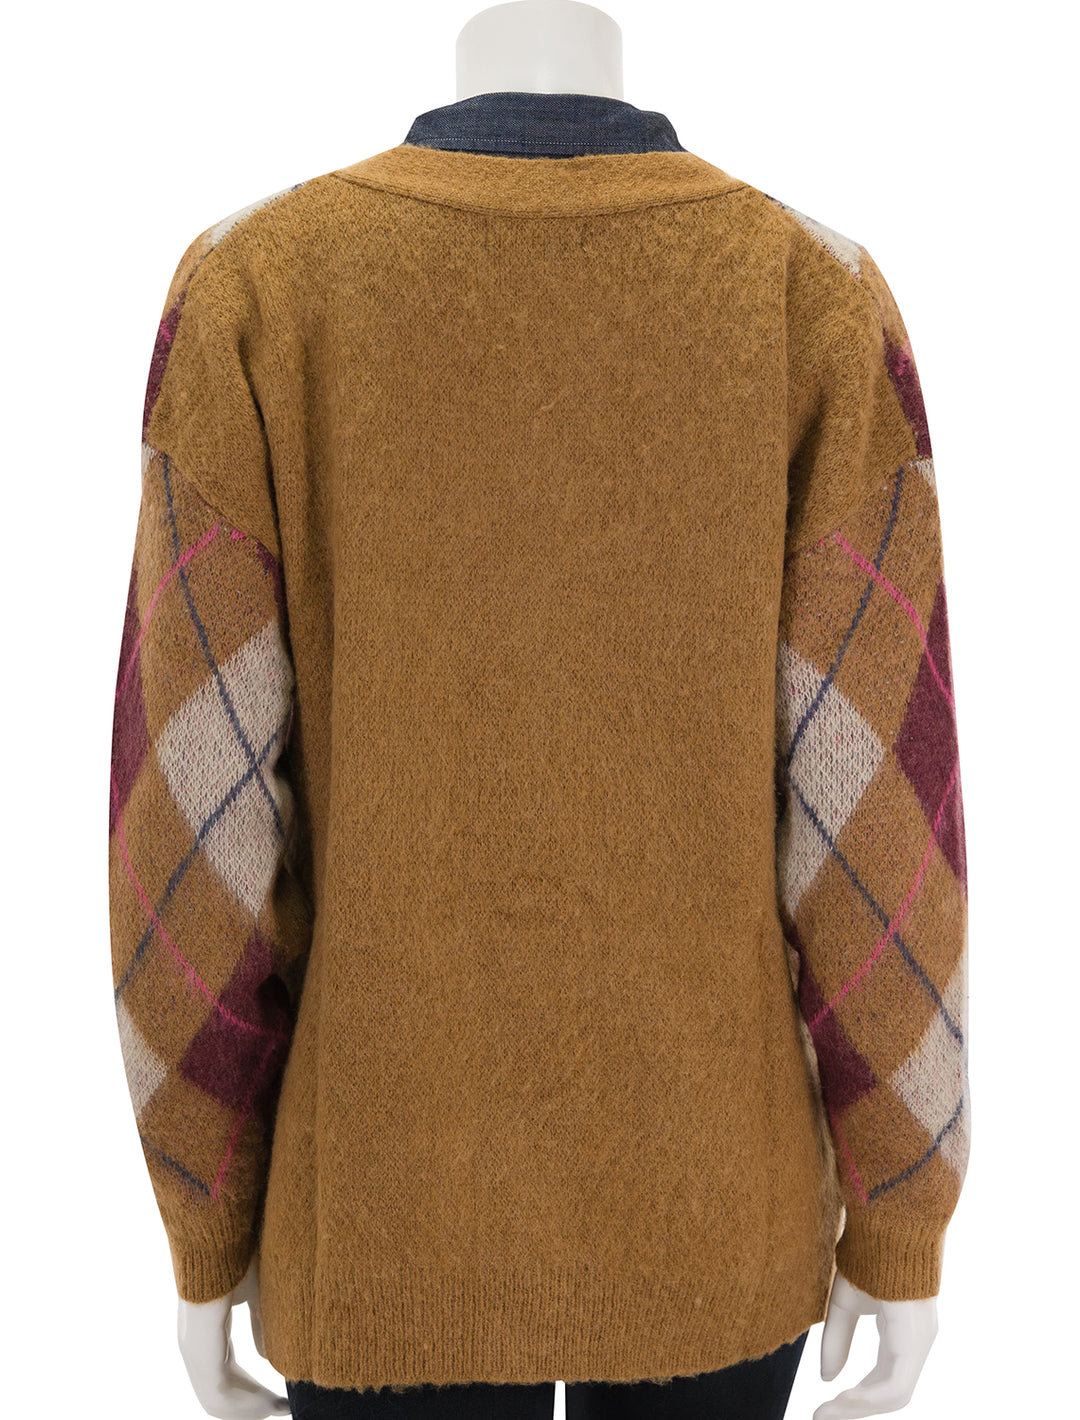 Back view of Steve Madden's lexie cardigan in tan argyle.